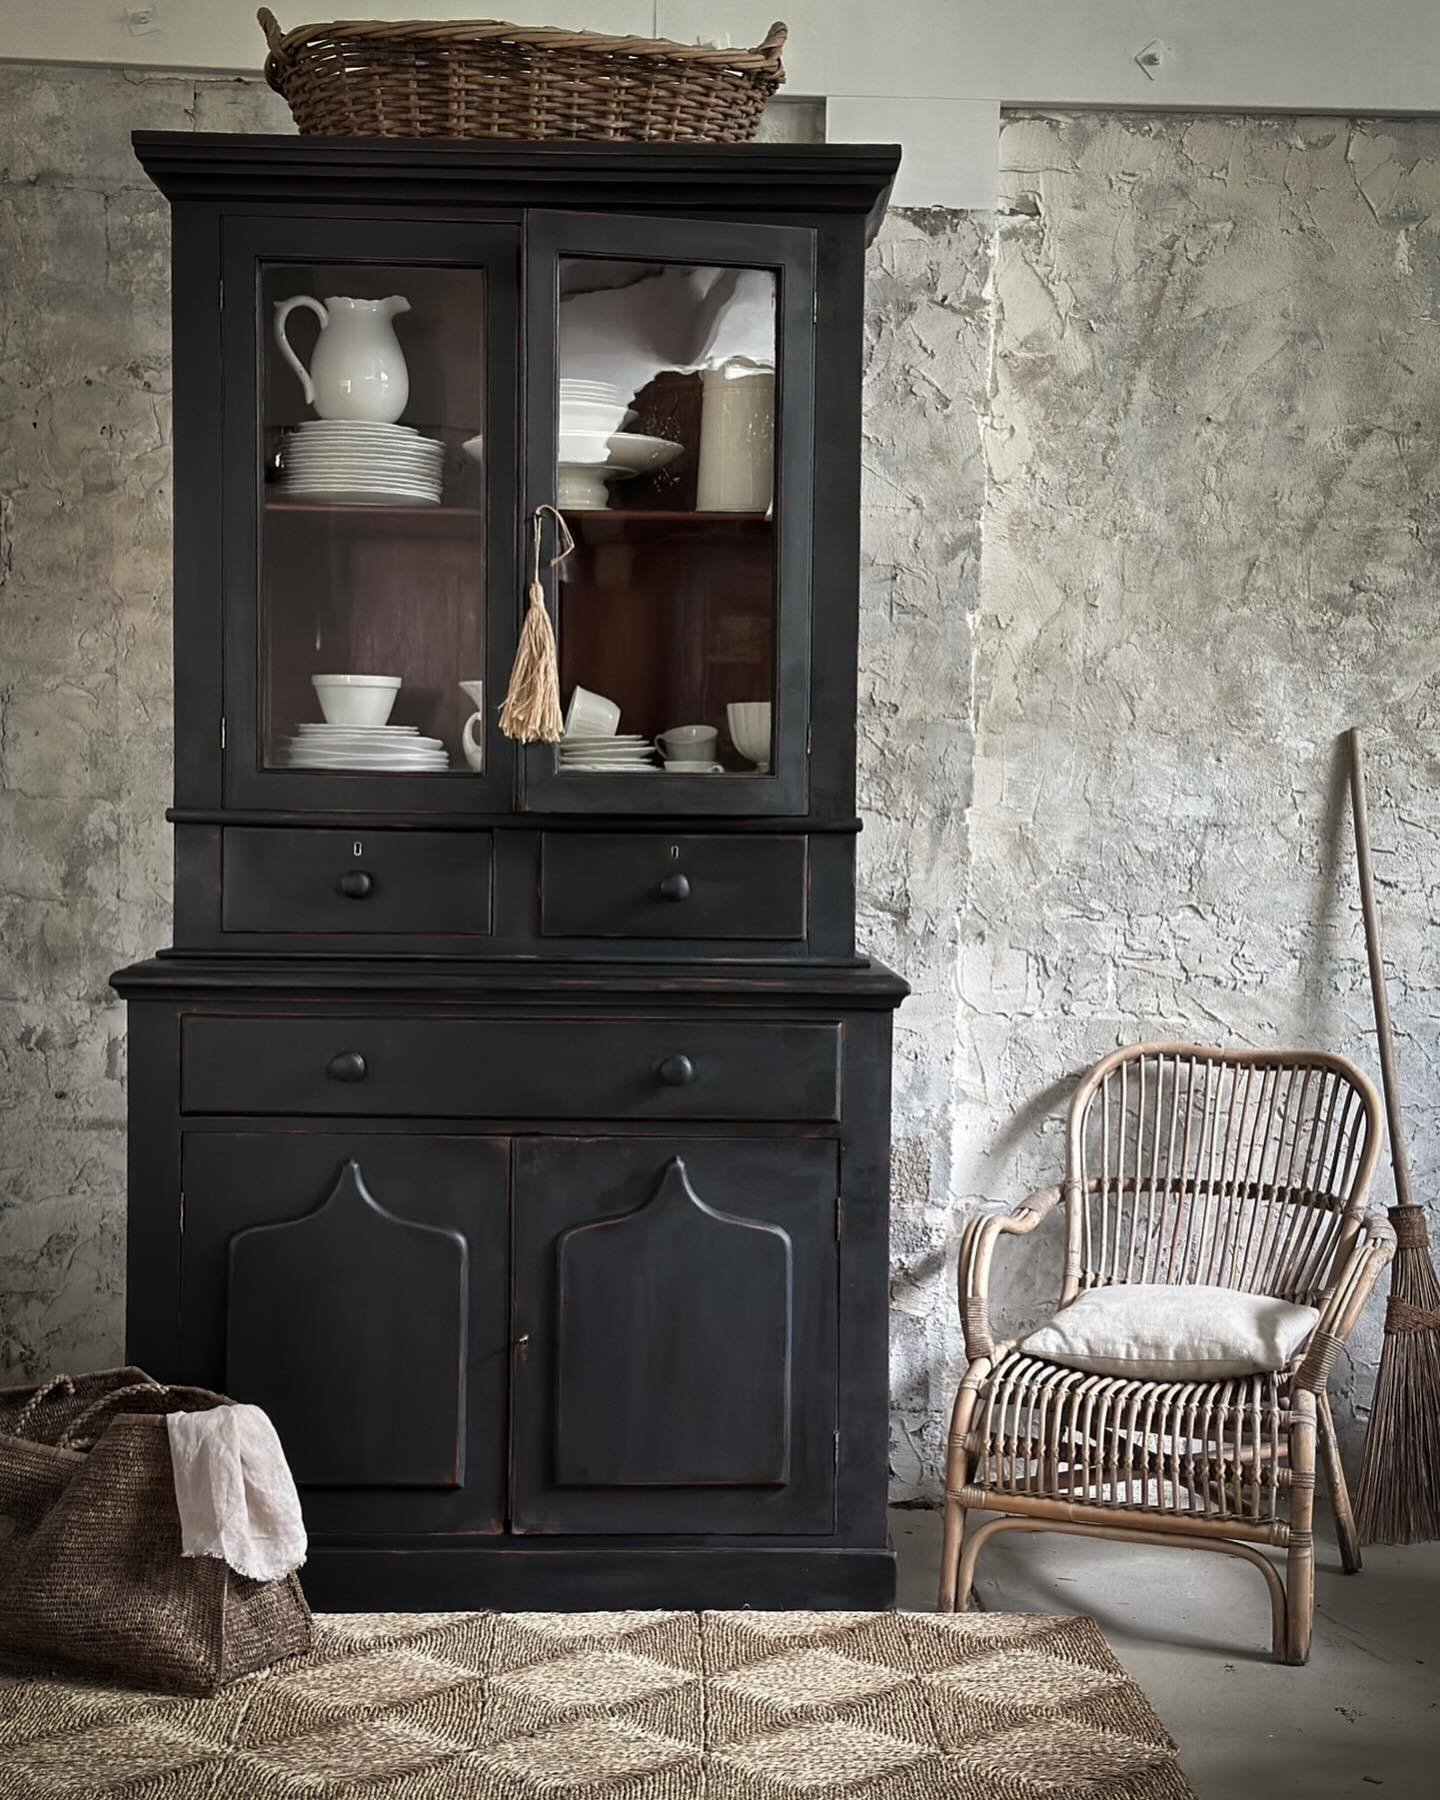 The most handsome &lsquo;Victorian bookcase&rsquo;.

And a fantastic storage solution for so many spaces; a kitchen, library, laundry or bathroom.
It&rsquo;s worn, painted finish is stunning and reveals the character and charm of an aged furniture pi